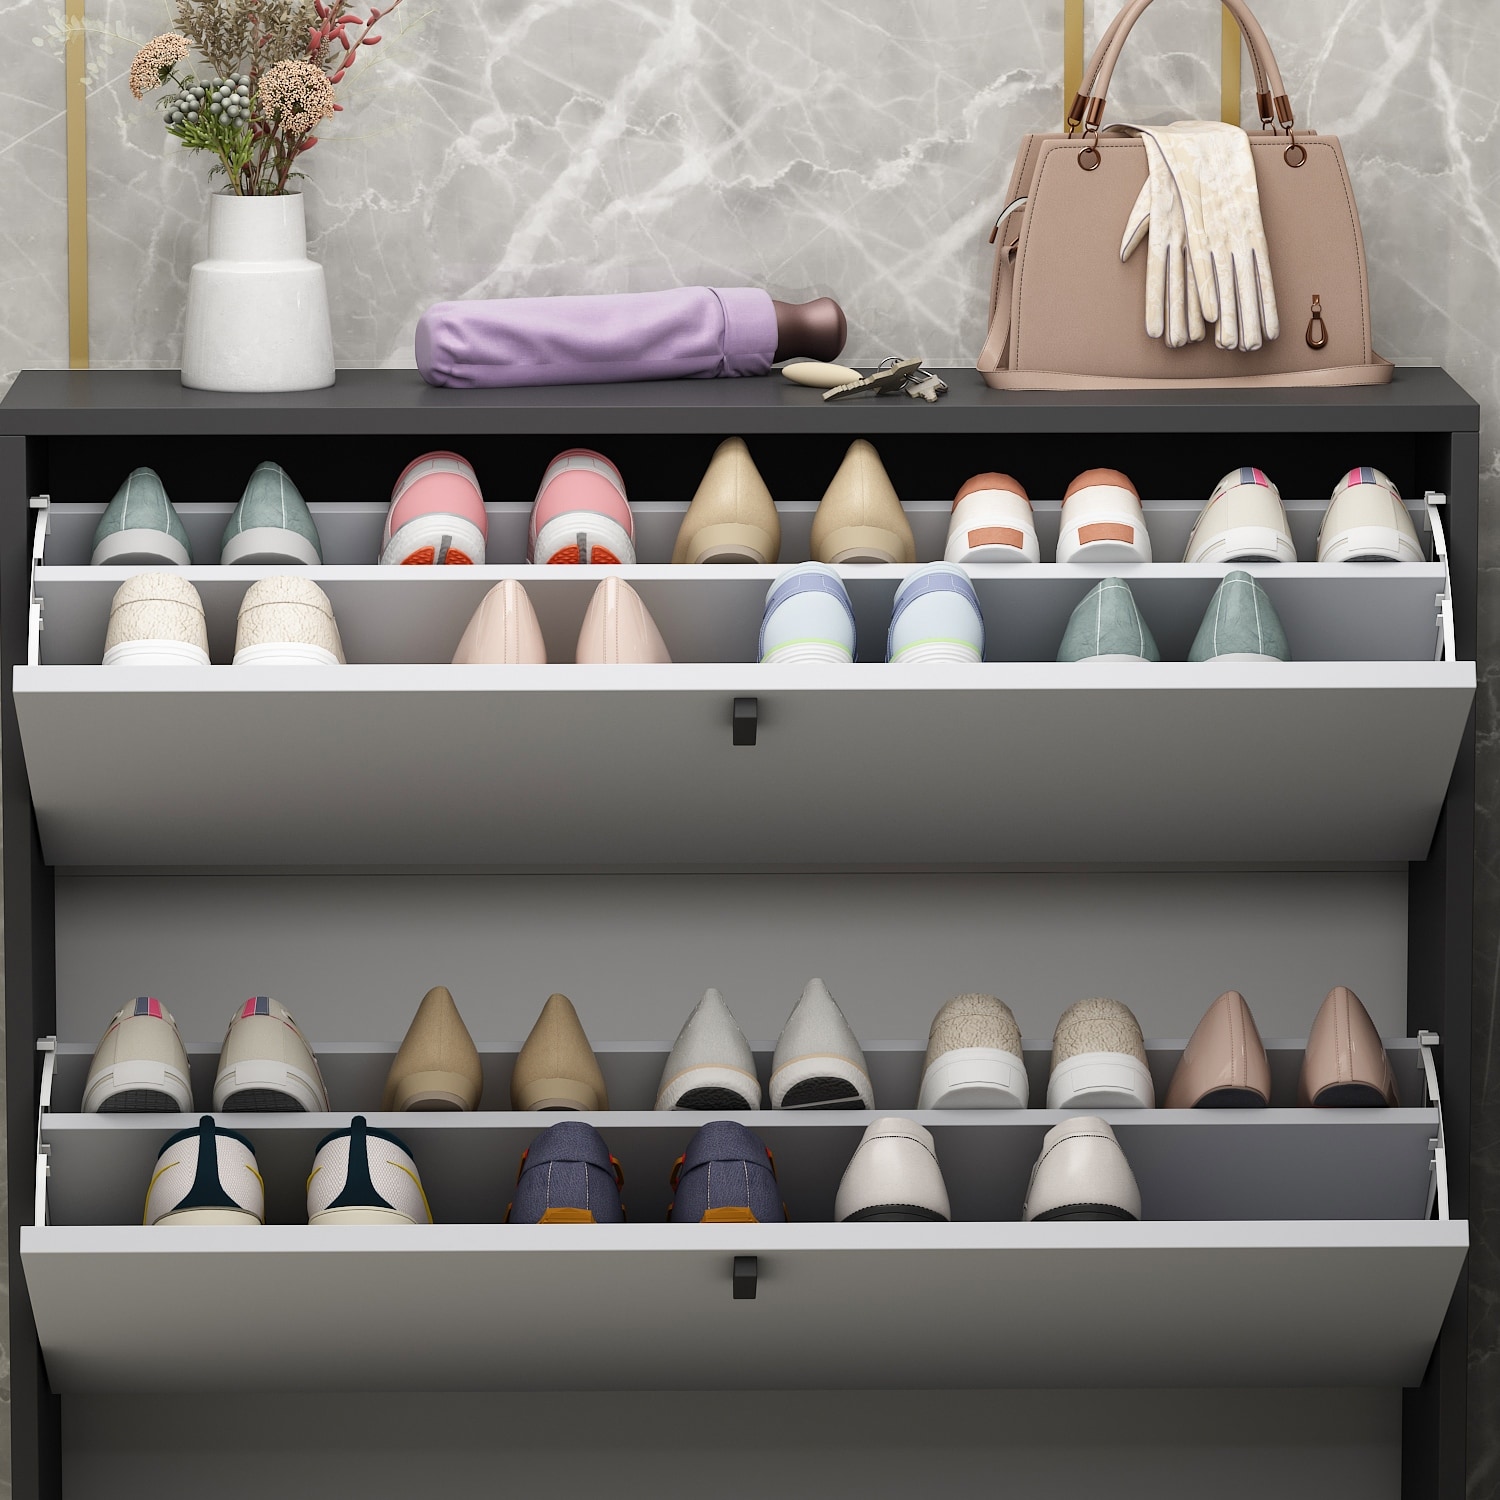 https://ak1.ostkcdn.com/images/products/is/images/direct/1c85e7888aa091067c43c7bb263134968ec21a7e/FAMAPY-3-Drawer-Entryway-Shoe-Cabinet-Wood-Shoe-Storage-Drawer.jpg